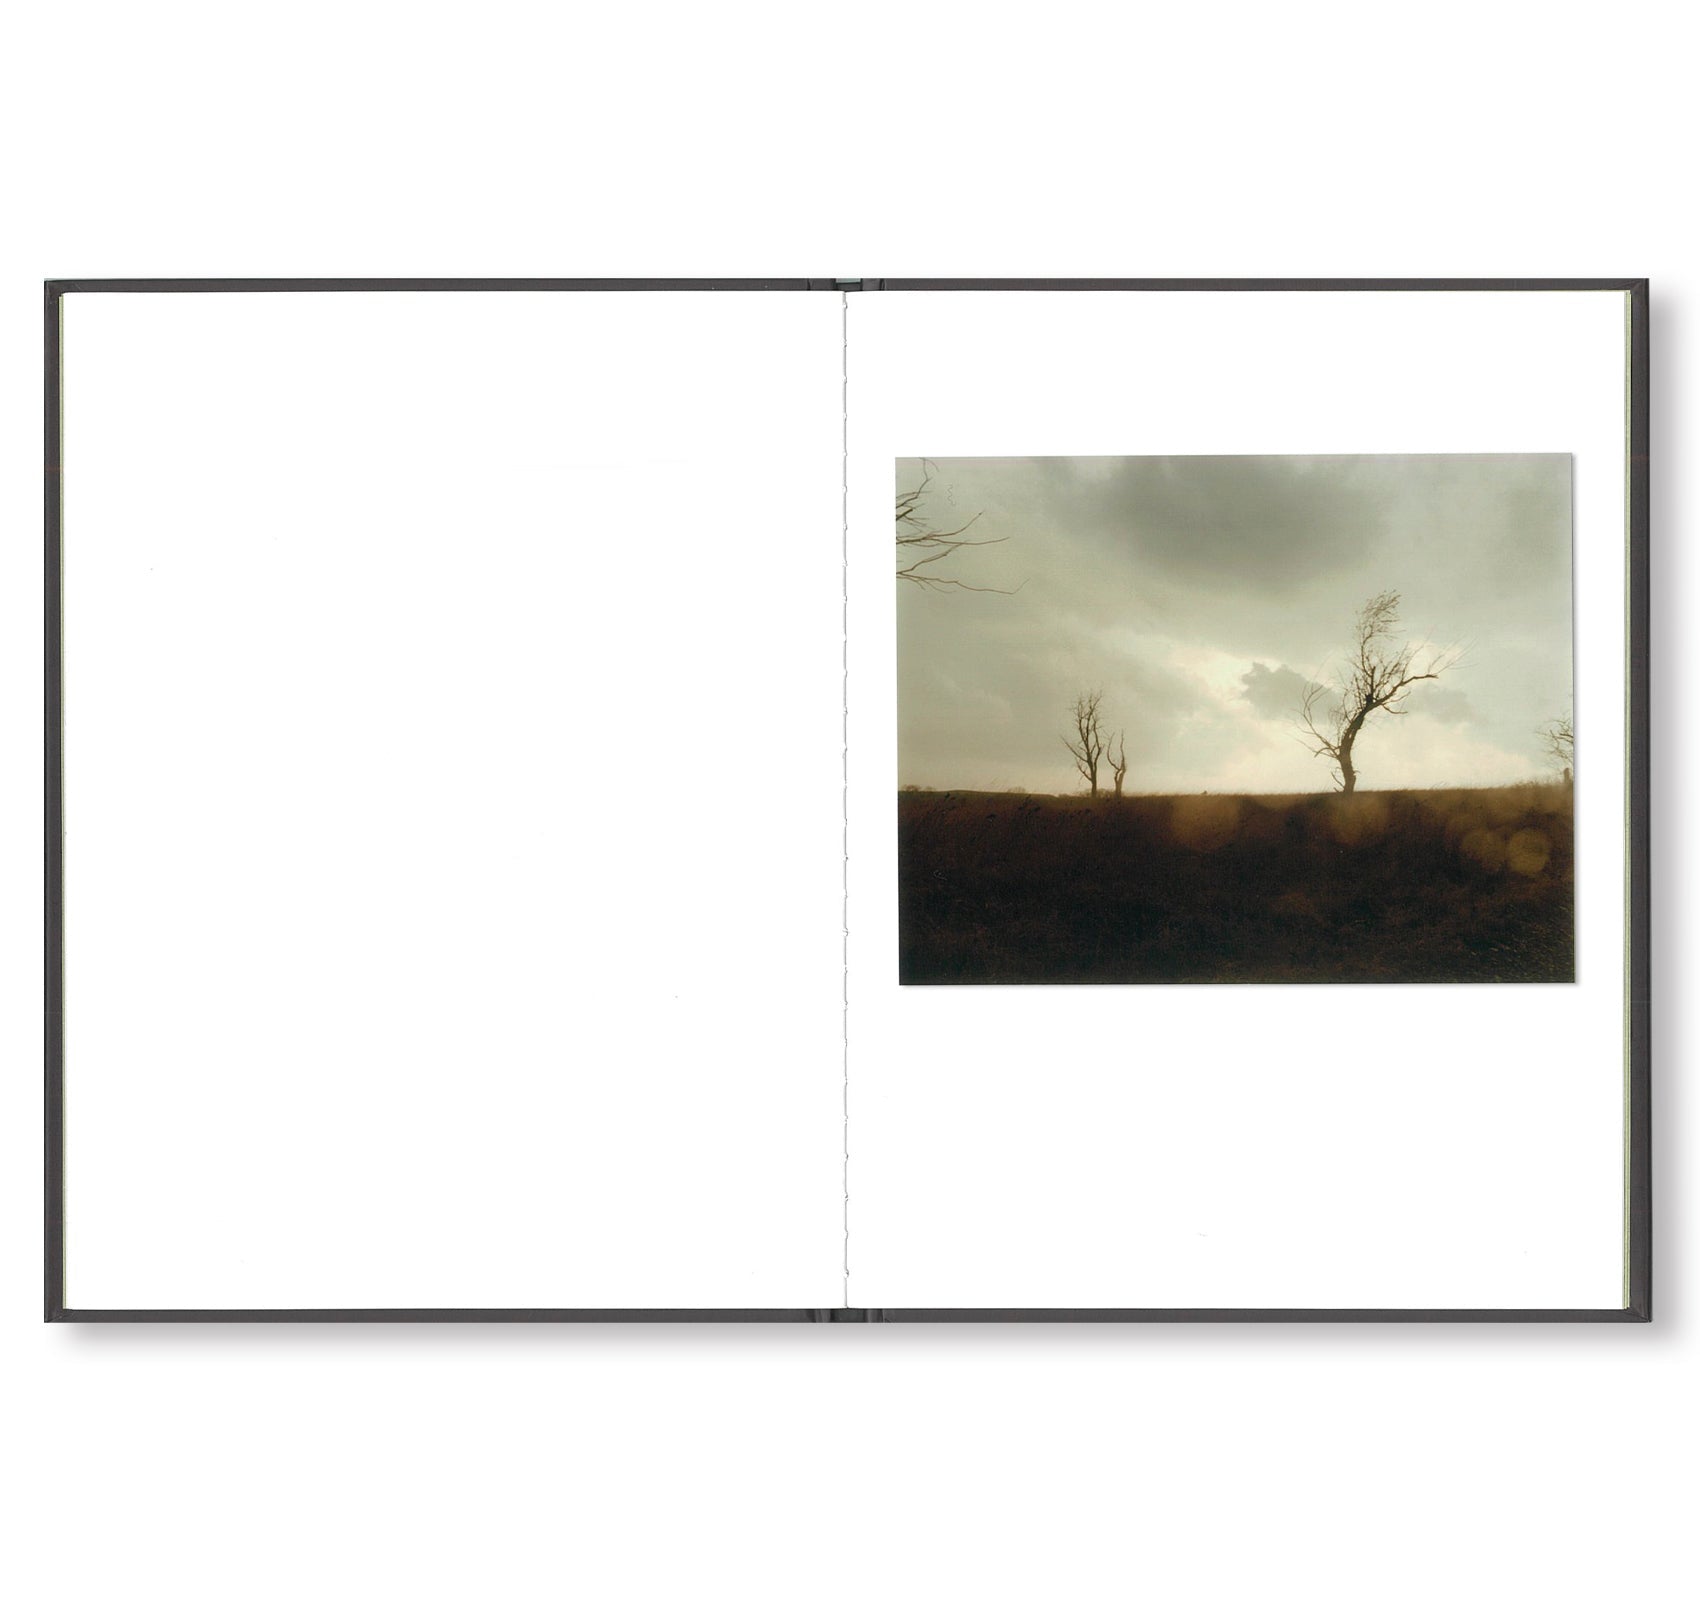 ONE PICTURE BOOK #59: CRACKED TREE by Todd Hido